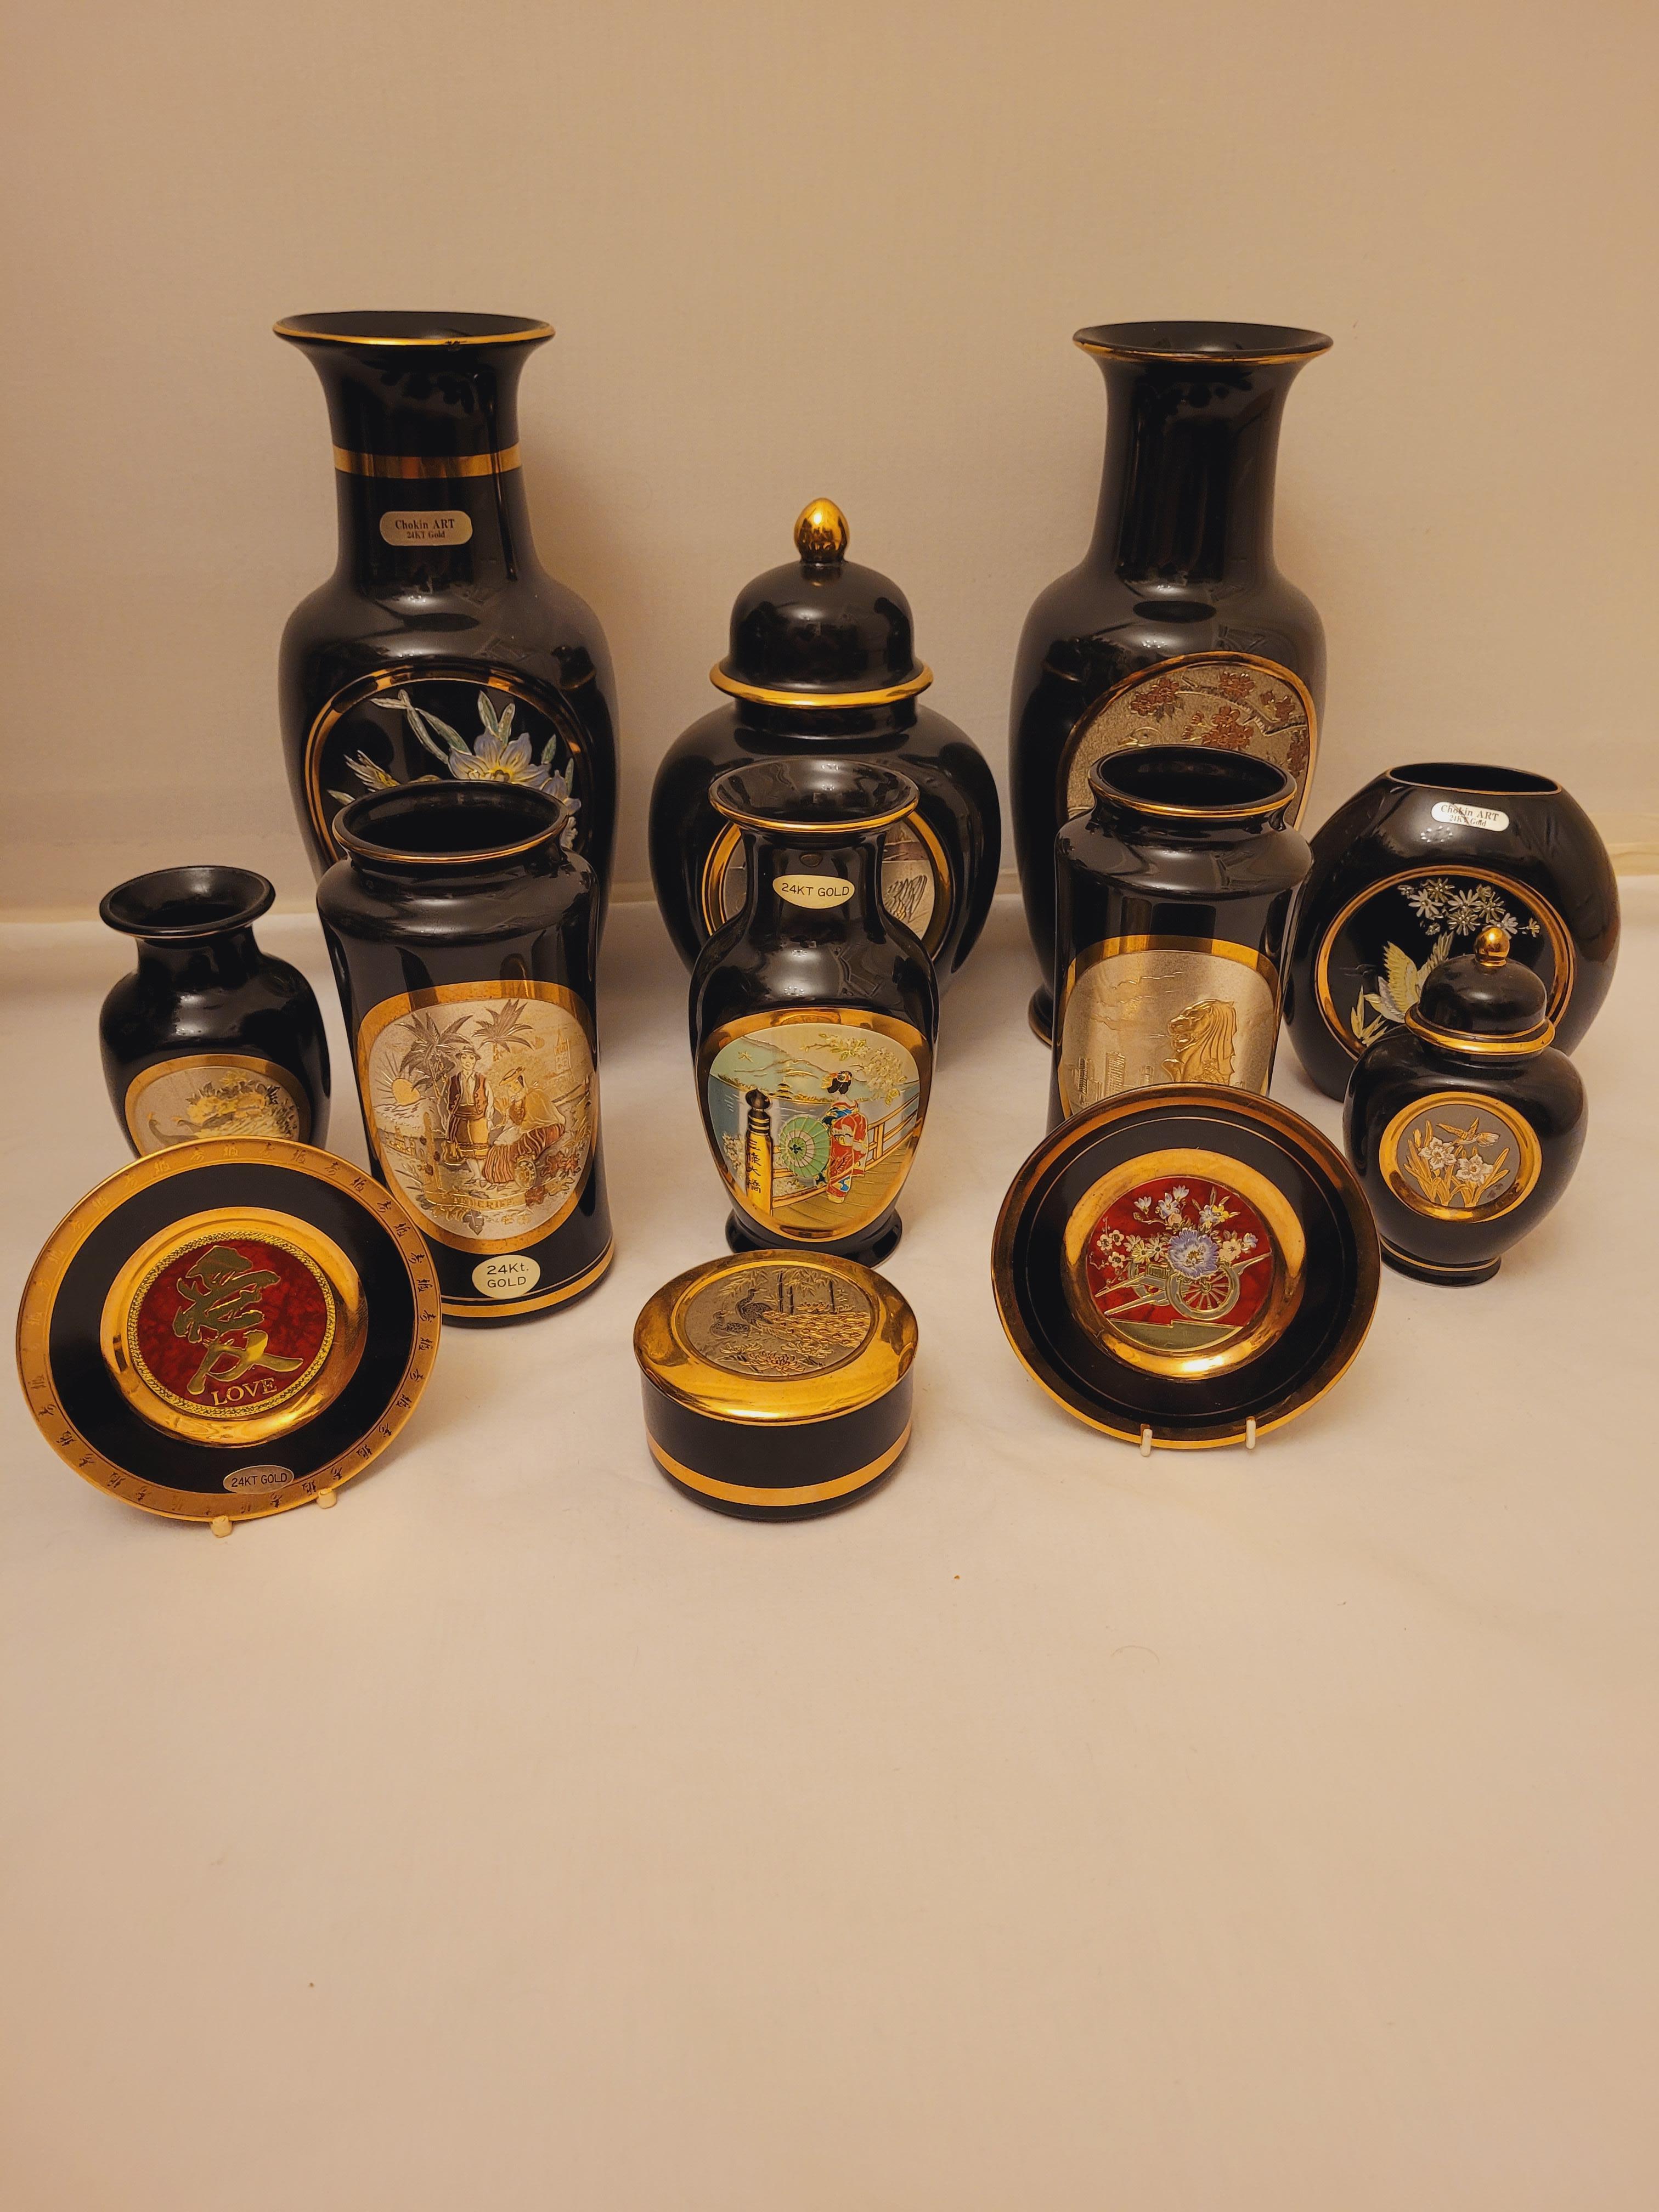 Beautiful Art of Chokin set of seven vases, one dish and two plates.
